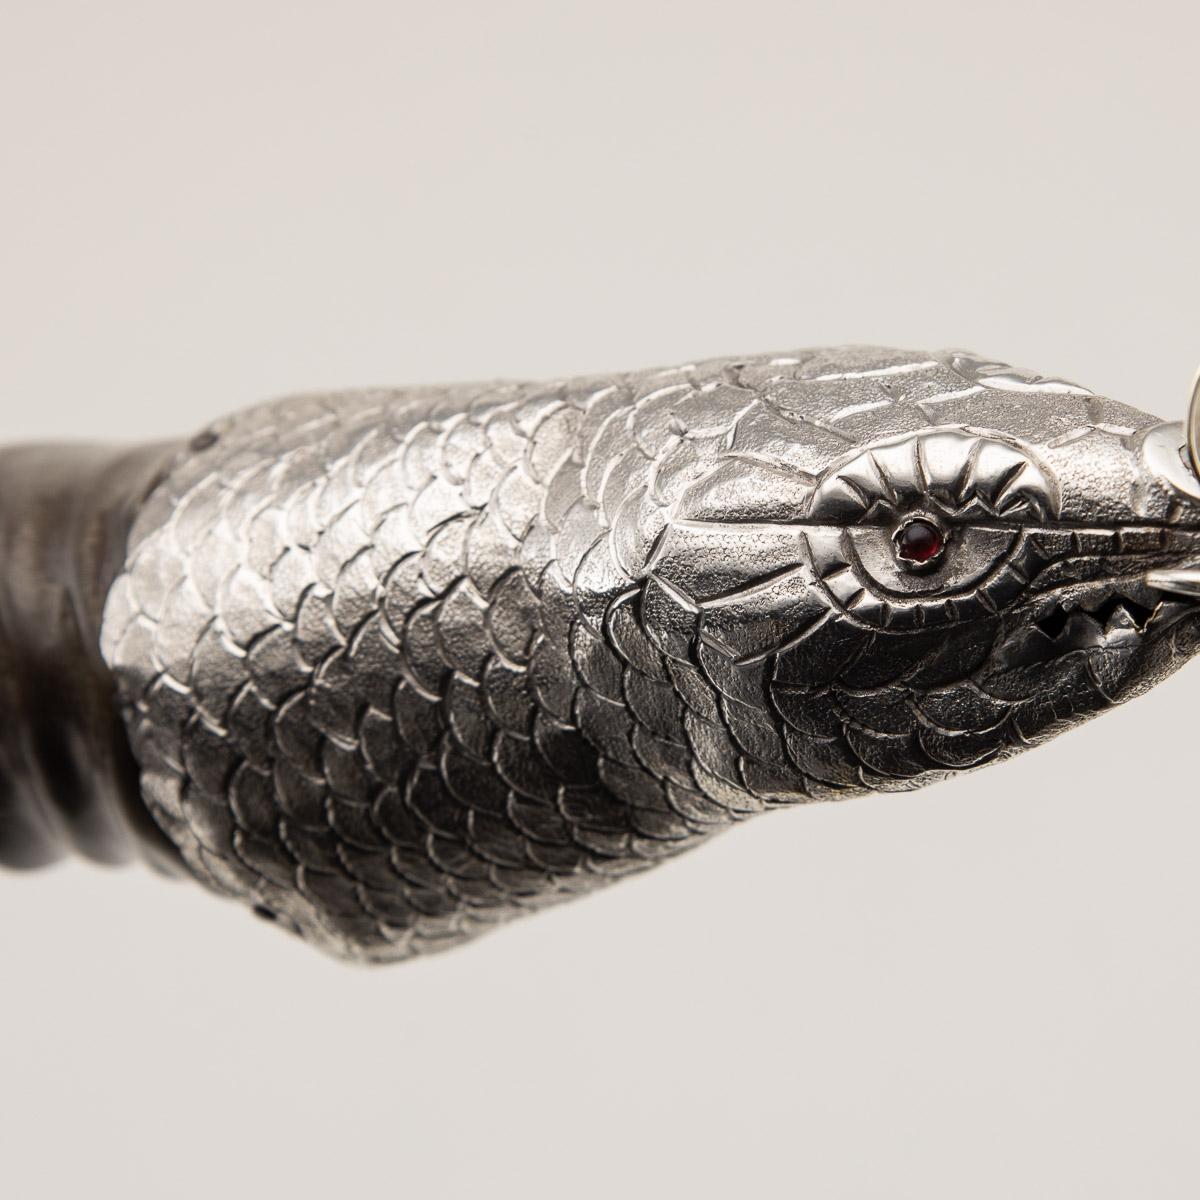 20th Century Edwardian Solid Silver & Horn Lizard Shaped Cigar Lighters, C.1900 For Sale 7